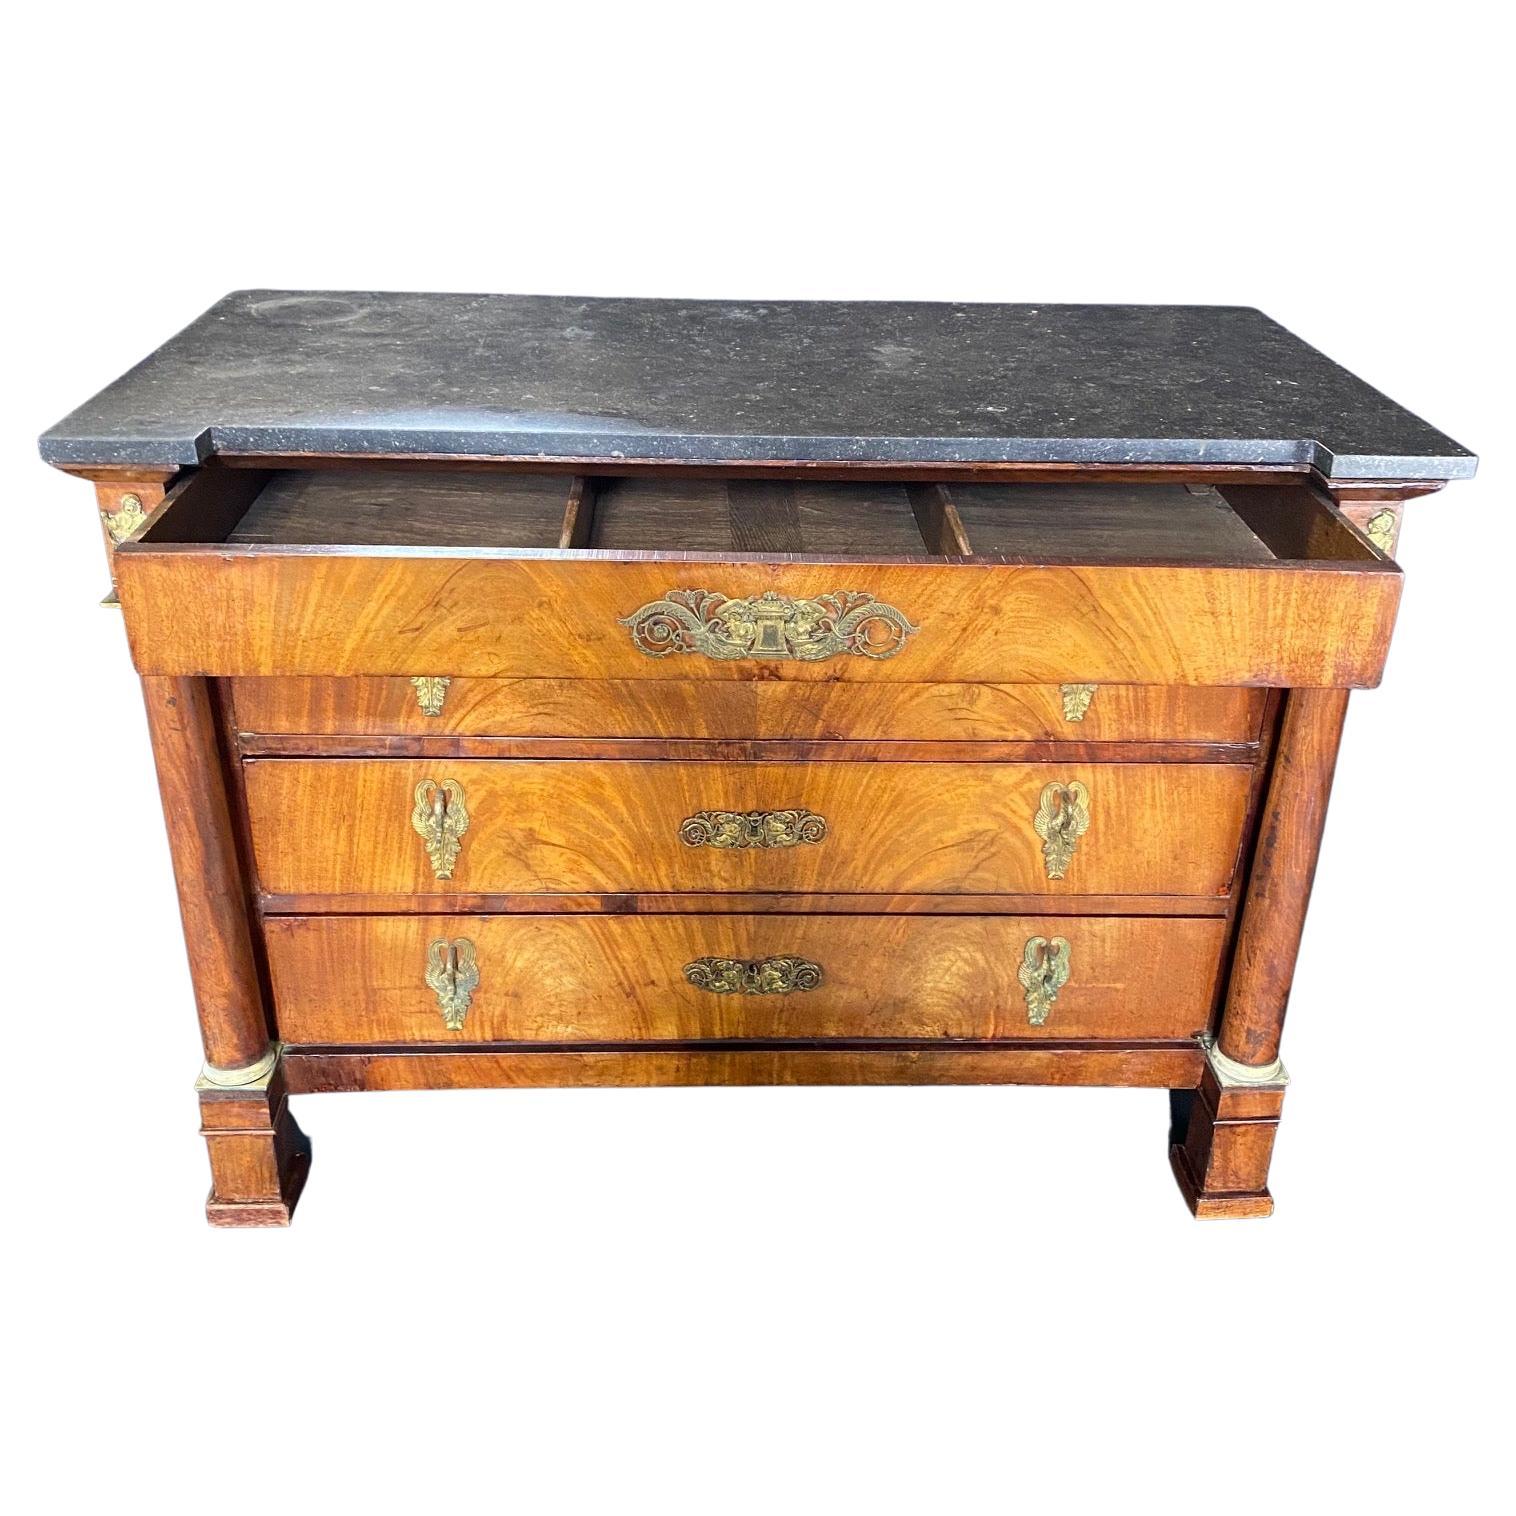 Found in the South of France, this exquisite burled walnut commode from the early 19th century features a dark grey marble top over four drawers. The lower three drawers are recessed and flanked by elegant columns with bronze Doric capitals and